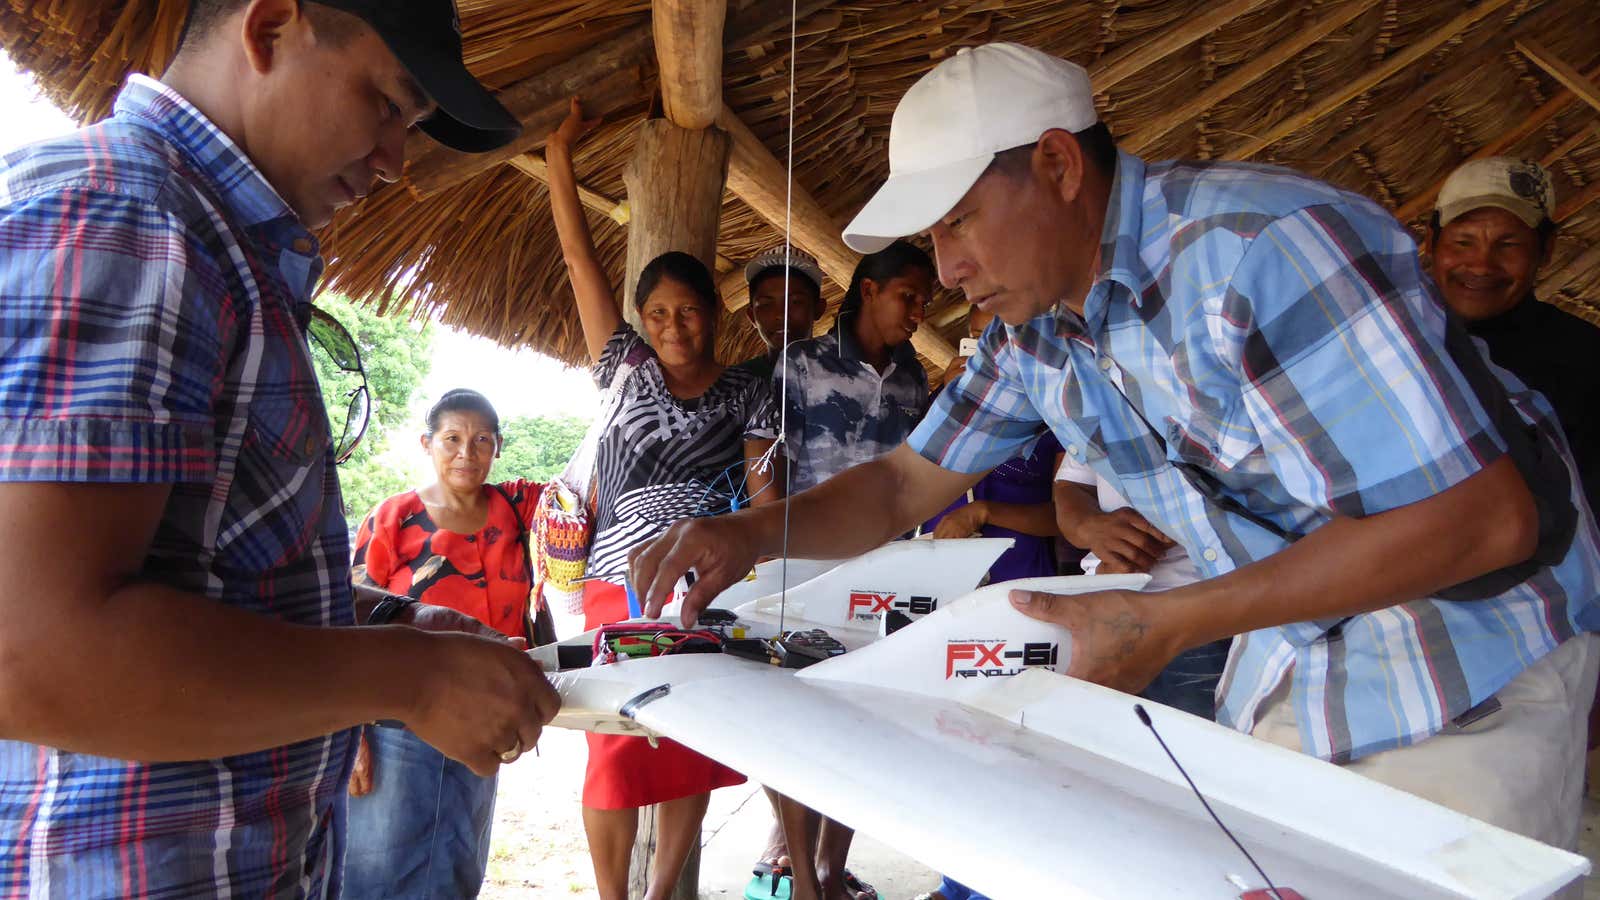 Members of Guyana’s Wapichan community built a drone to monitor illegal logging and pollution.